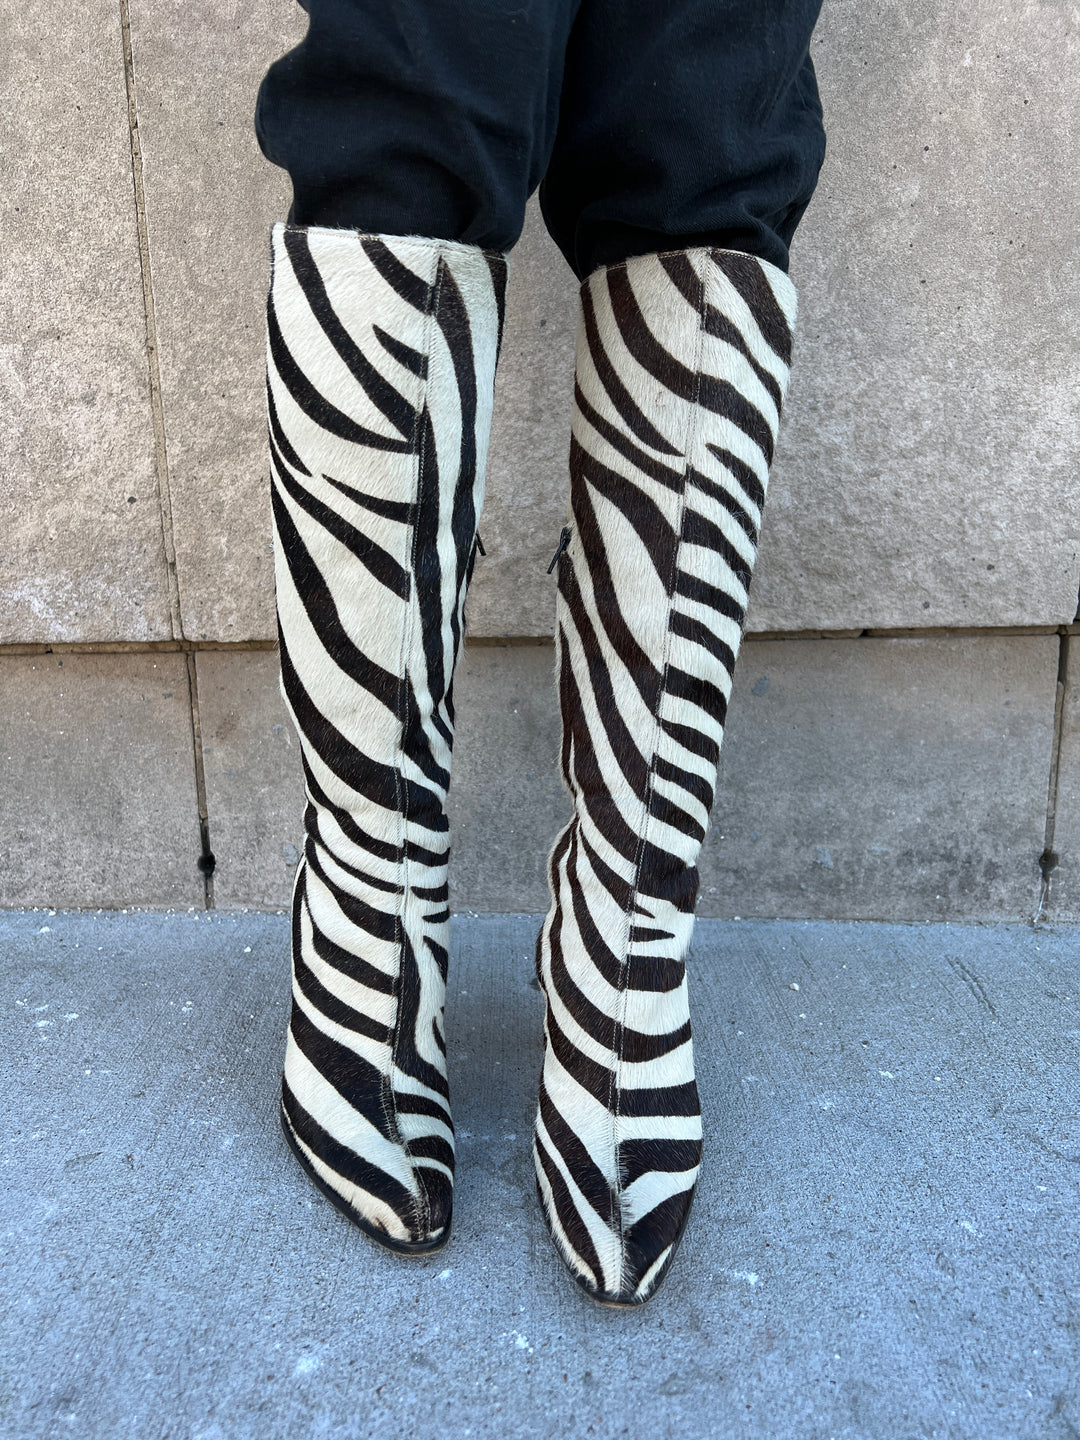 80s Zebra Print Cowhide Boots, Guess